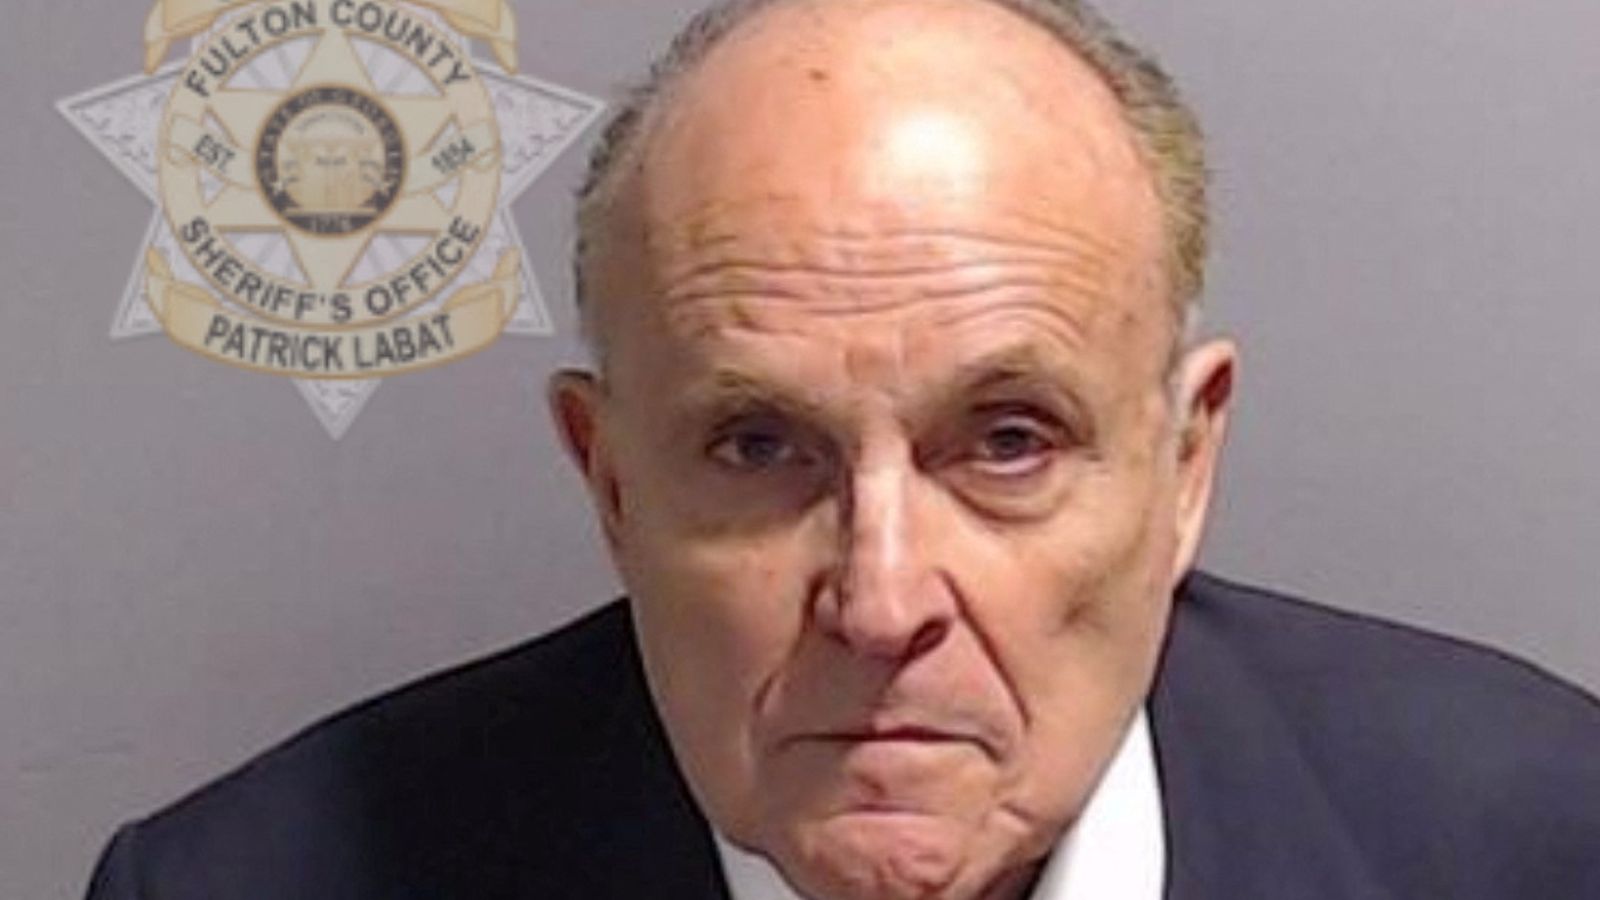 Former Trump lawyer Rudy Giuliani turns himself in over election fraud charges